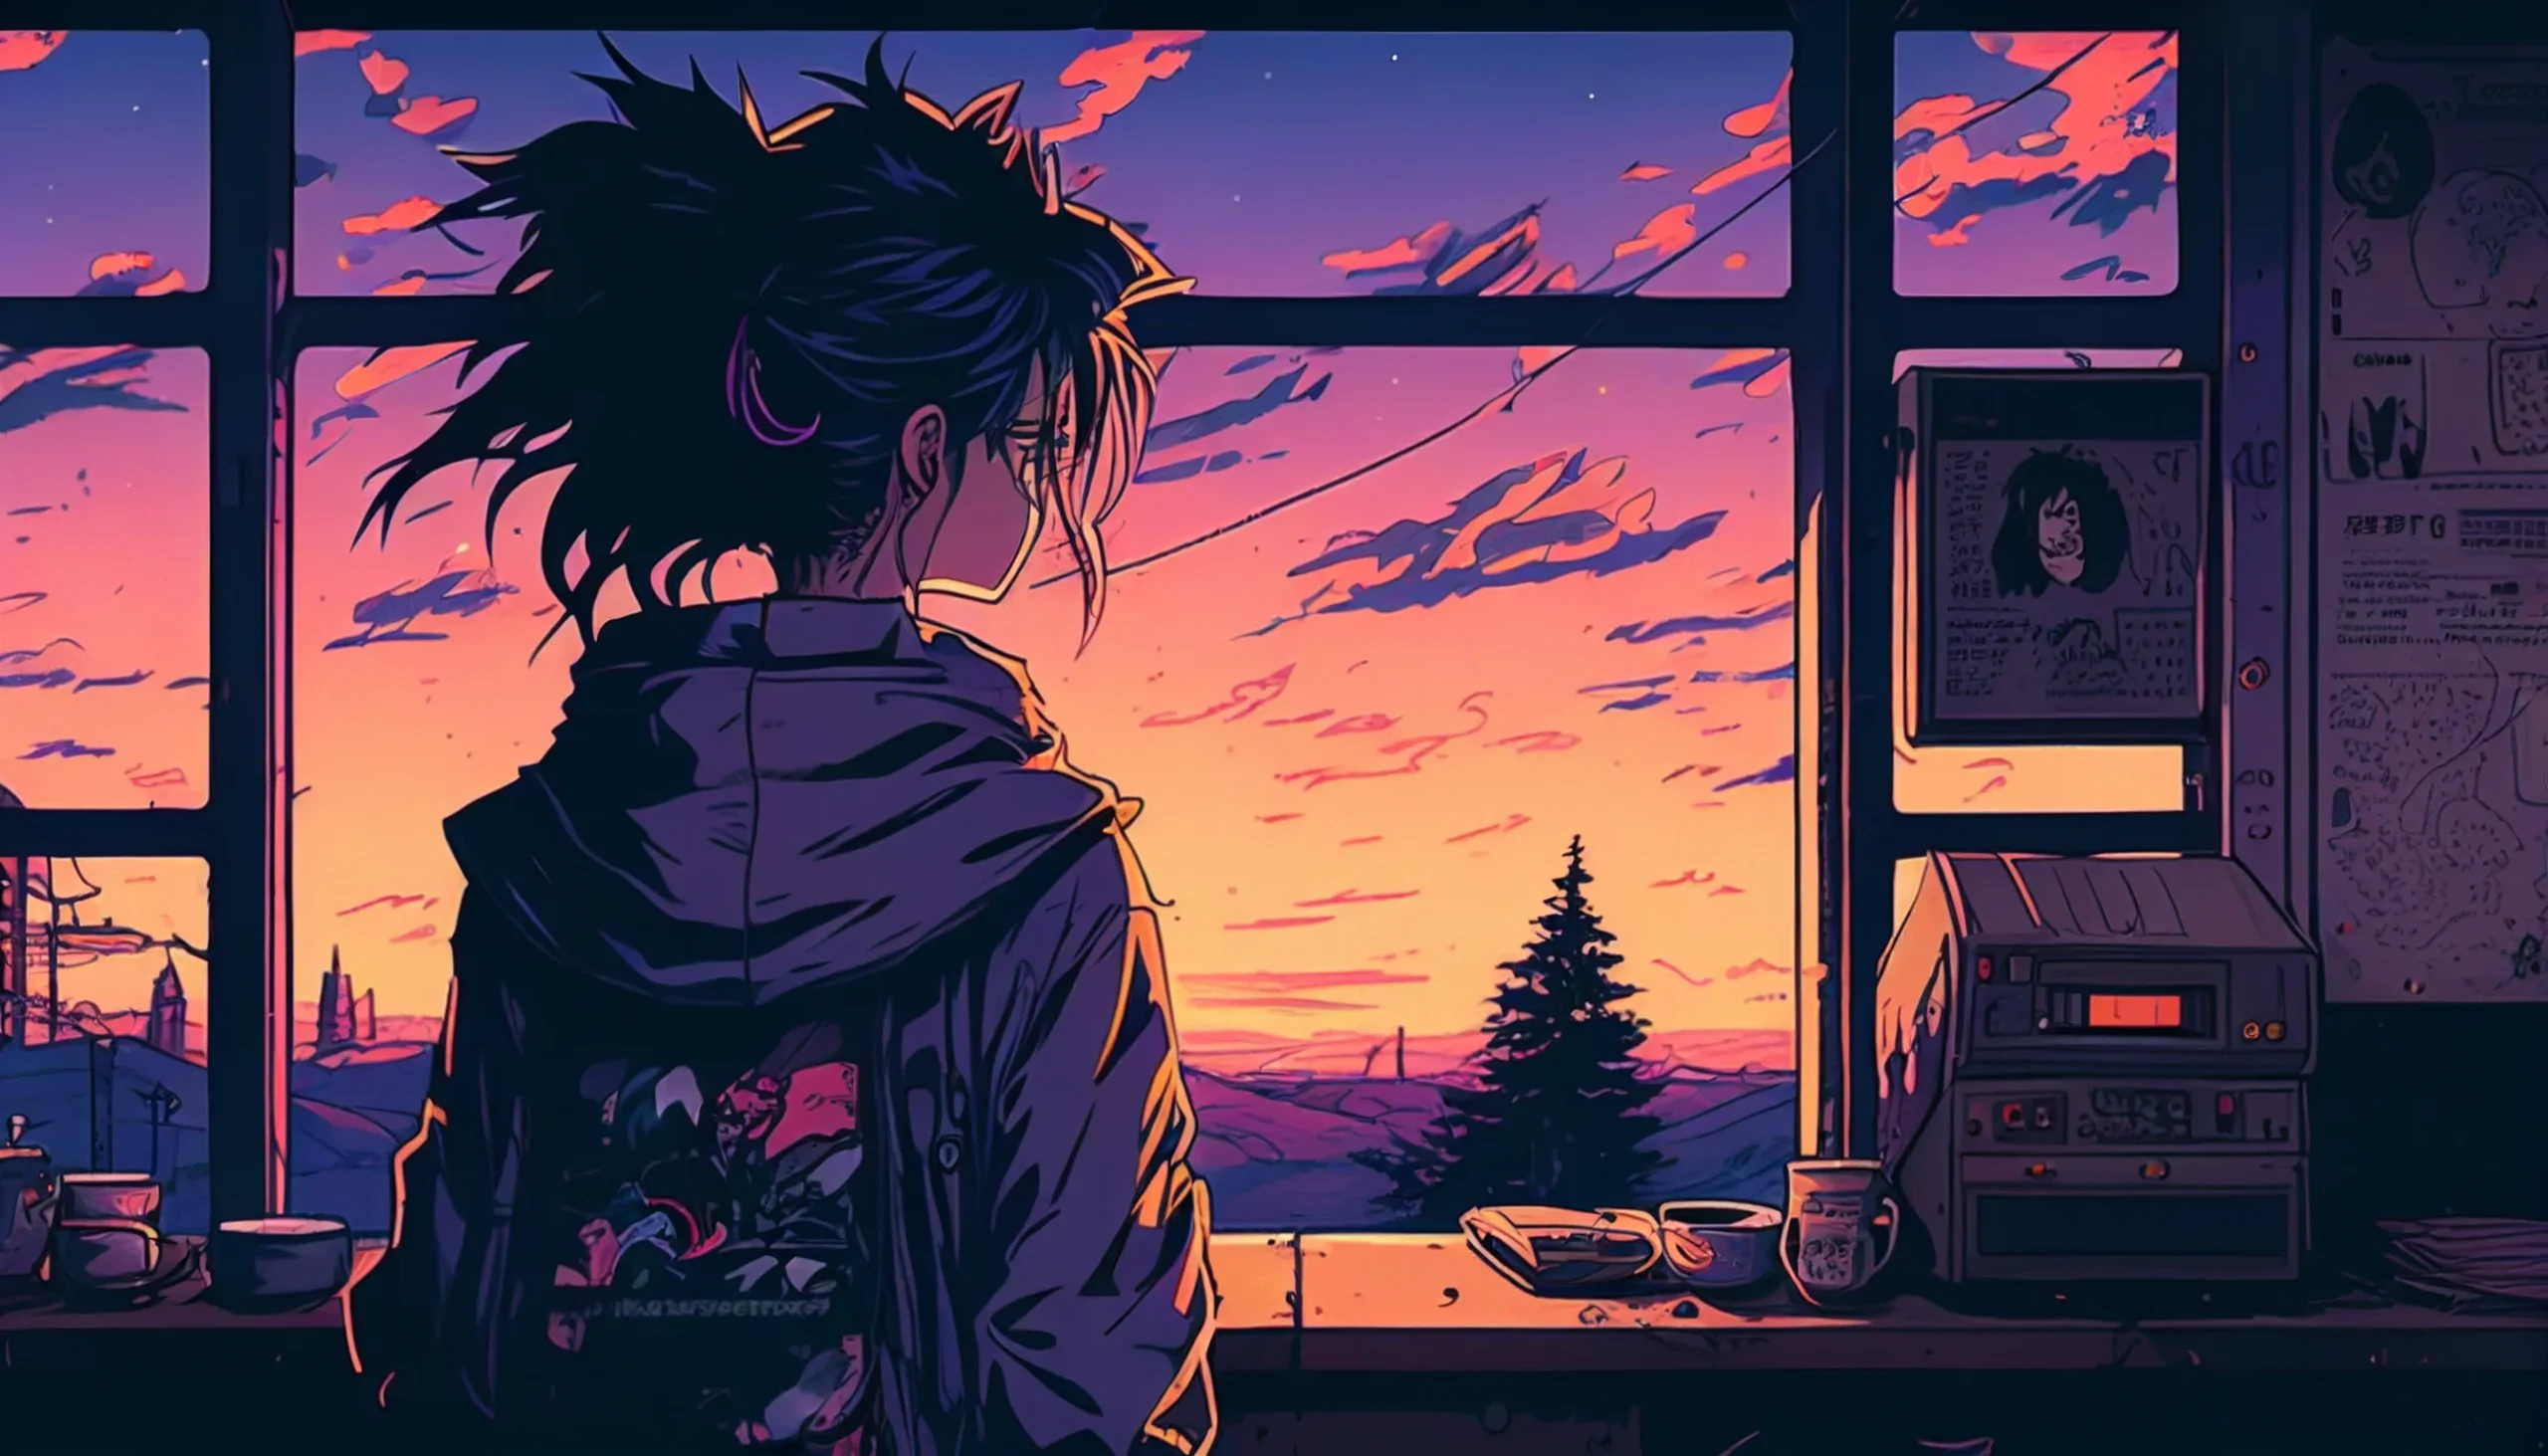 Step into Nostalgia with Stunning 90s Anime Aesthetic Desktop Wallpapers